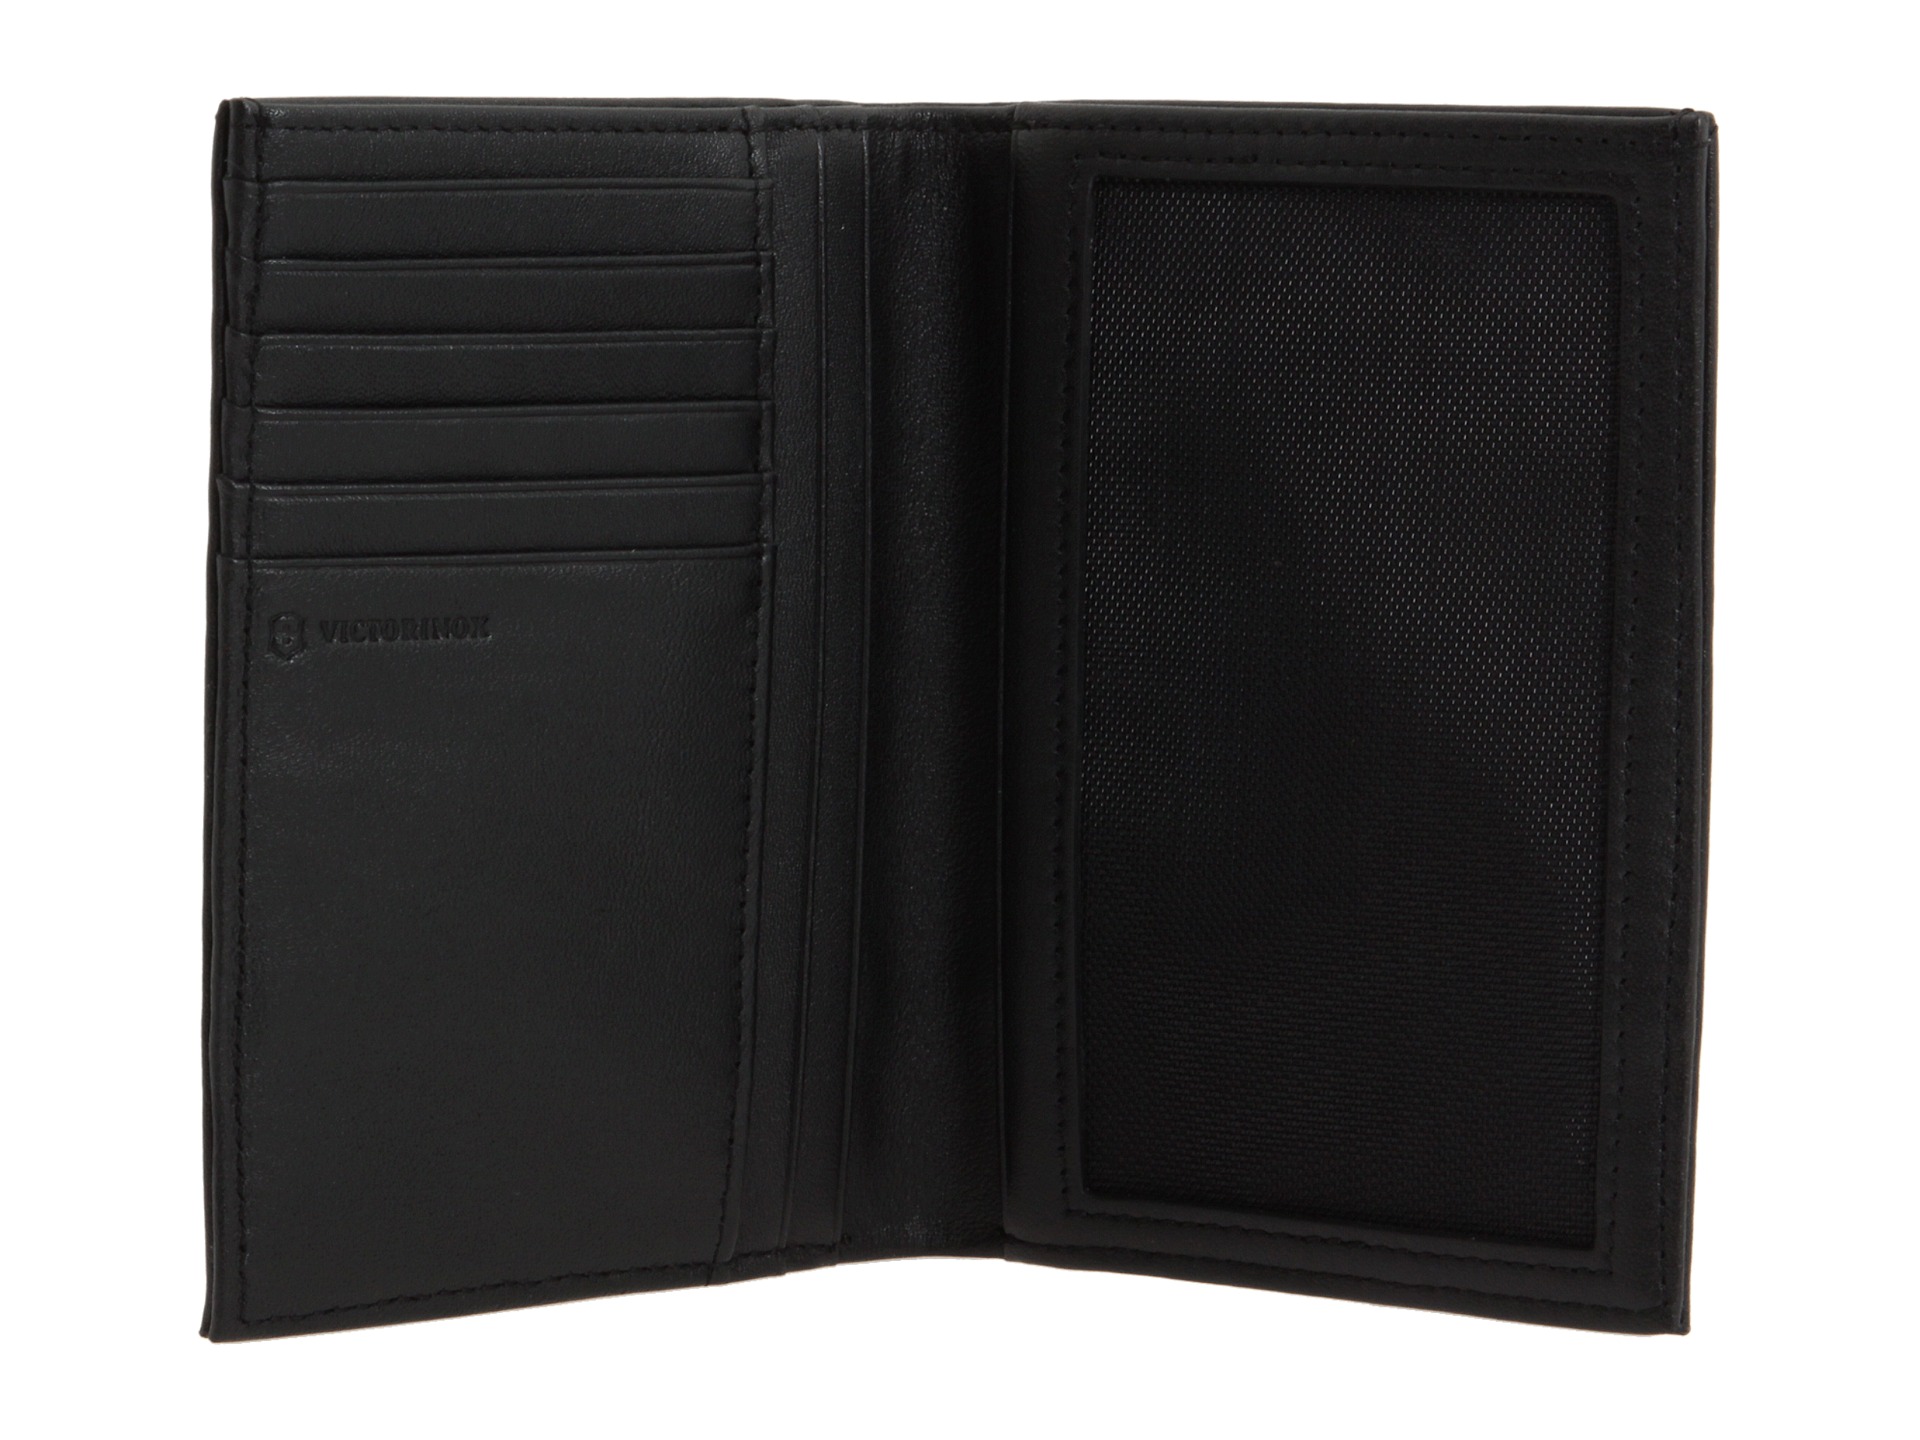 [wallet suggestions] Why is it so hard to find a vertical bi-fold wallet? My journey to find my ...